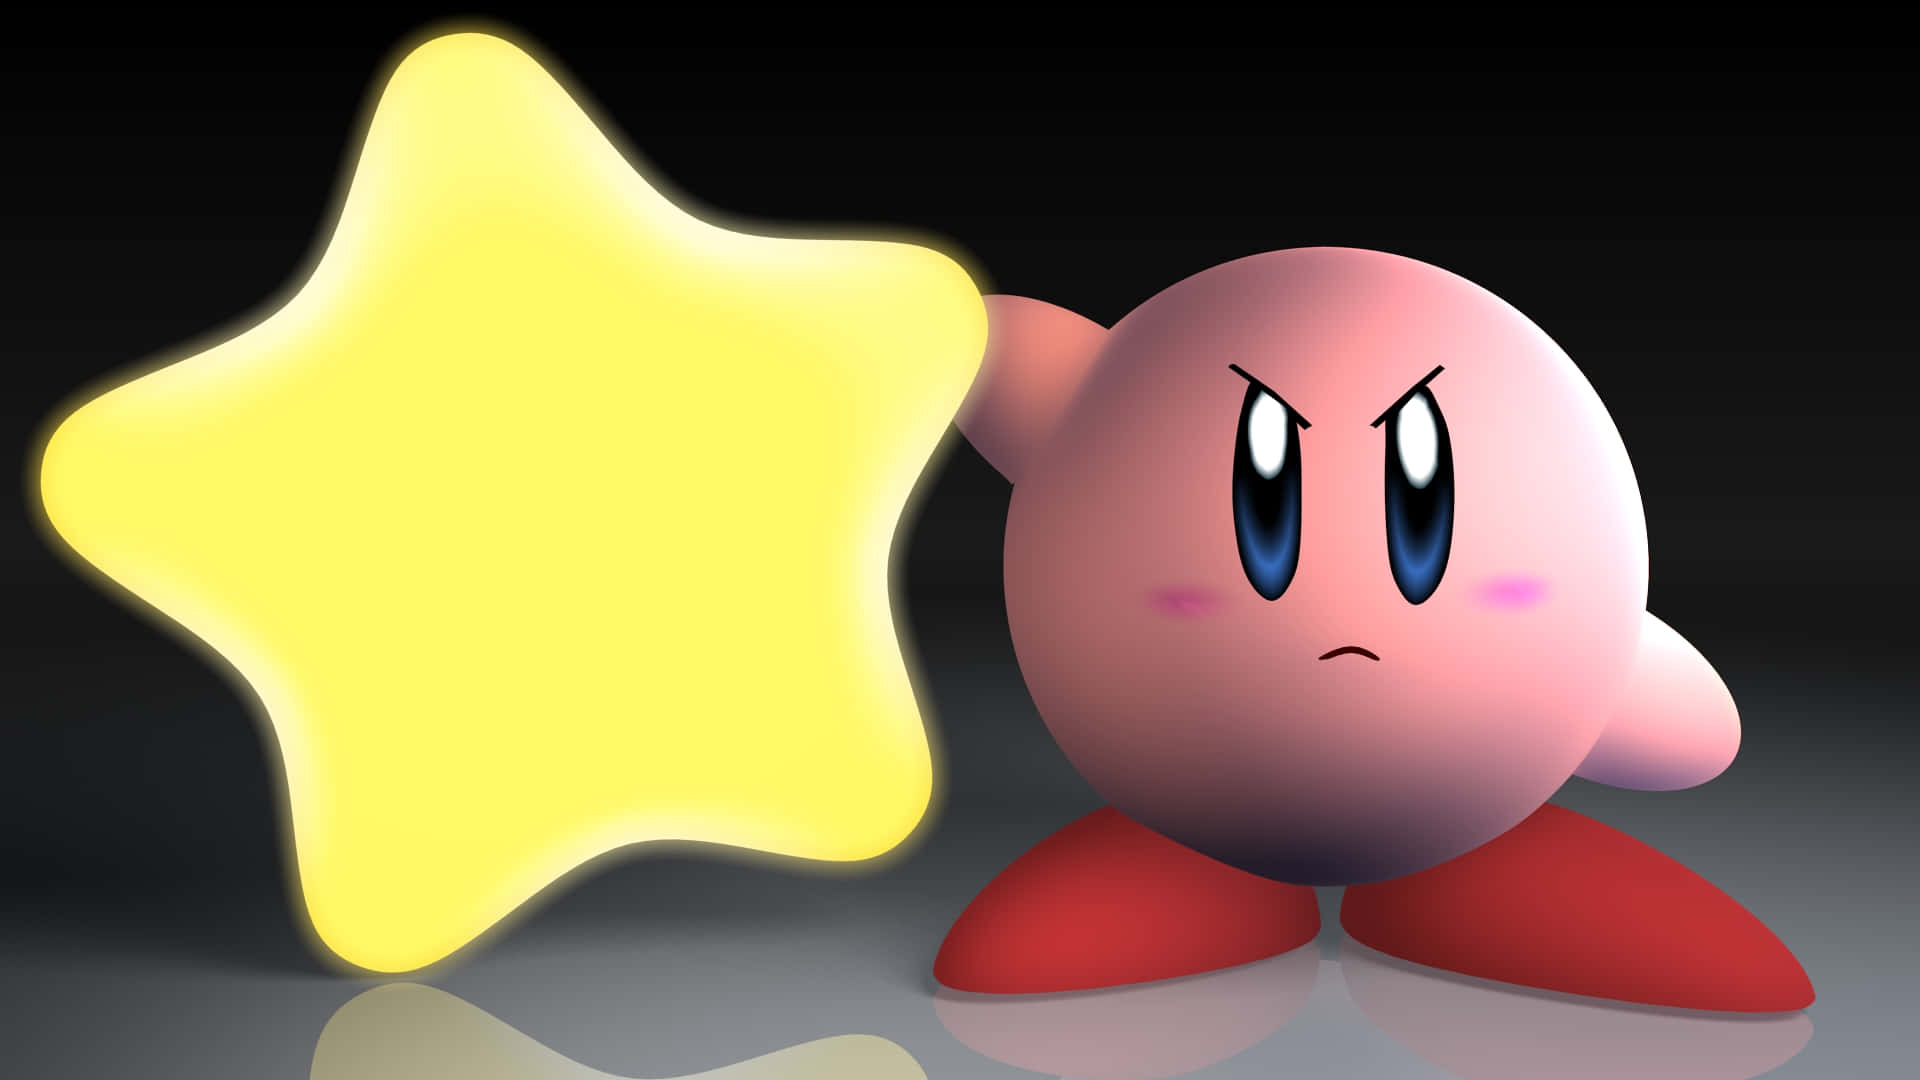 Kirby Looks to Take on Authority in Platform Adventure